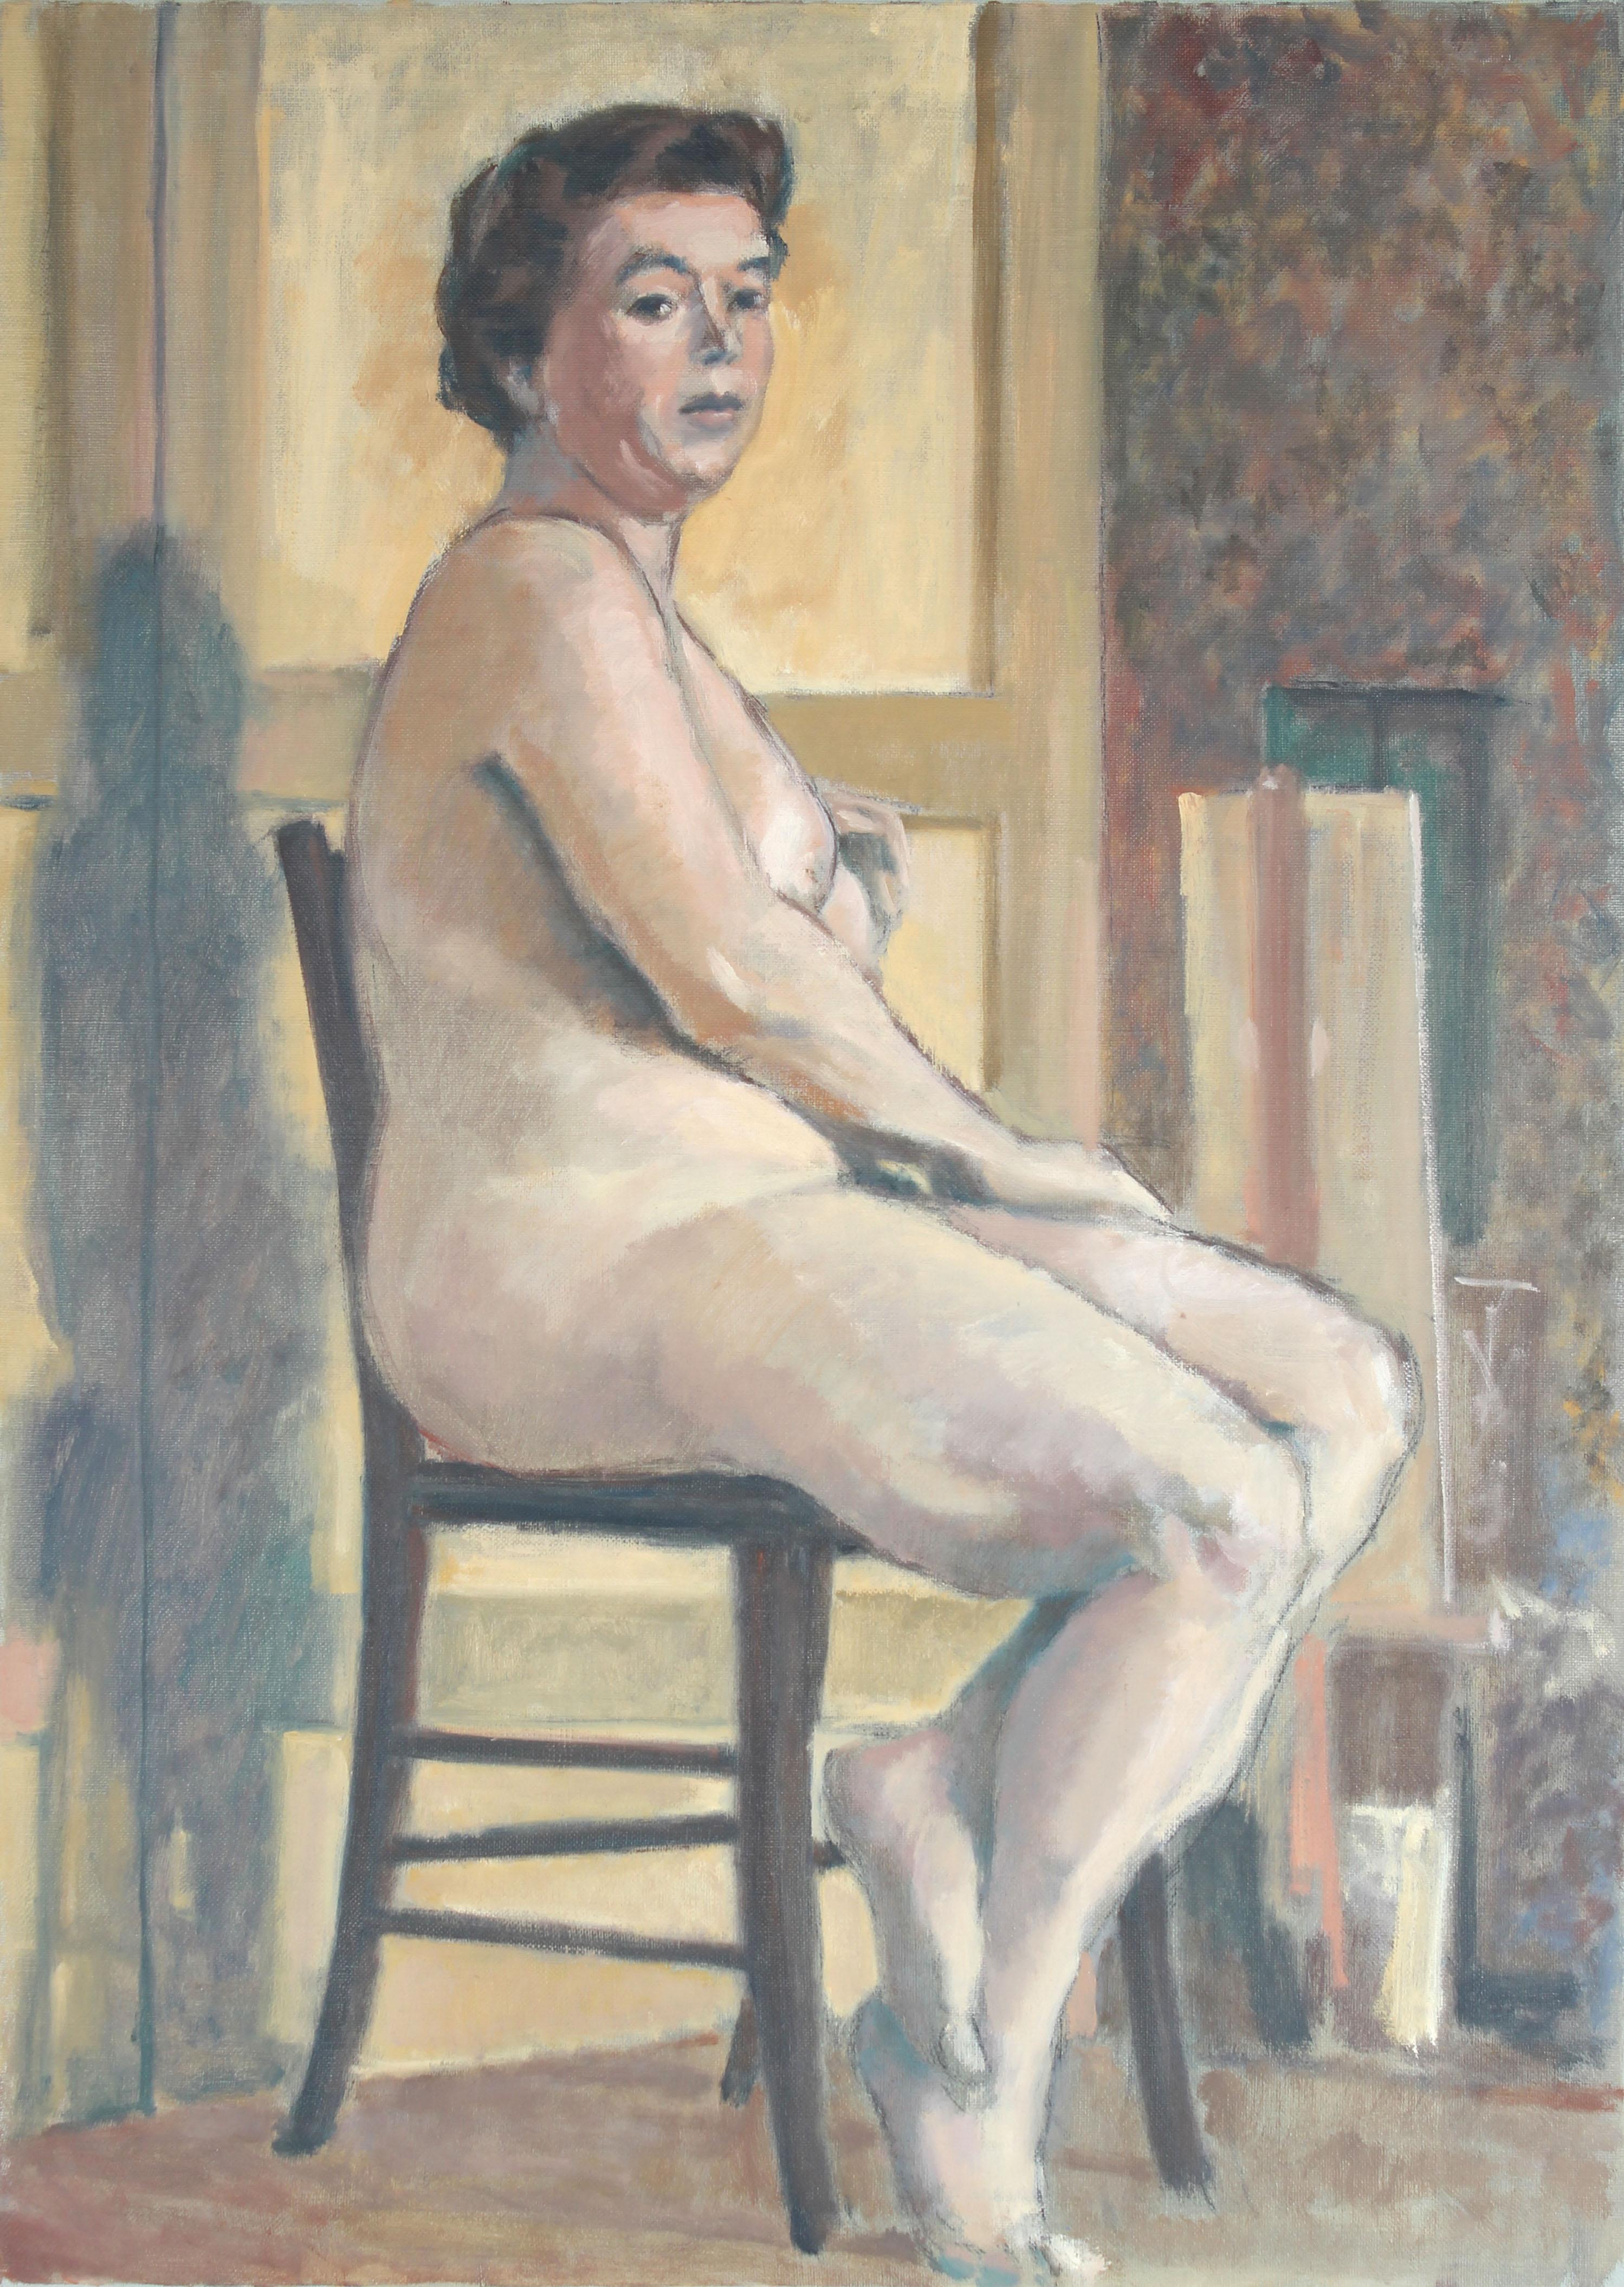 Rip Matteson Figurative Painting - 1950's Oil Painting of Female Nude Seated 